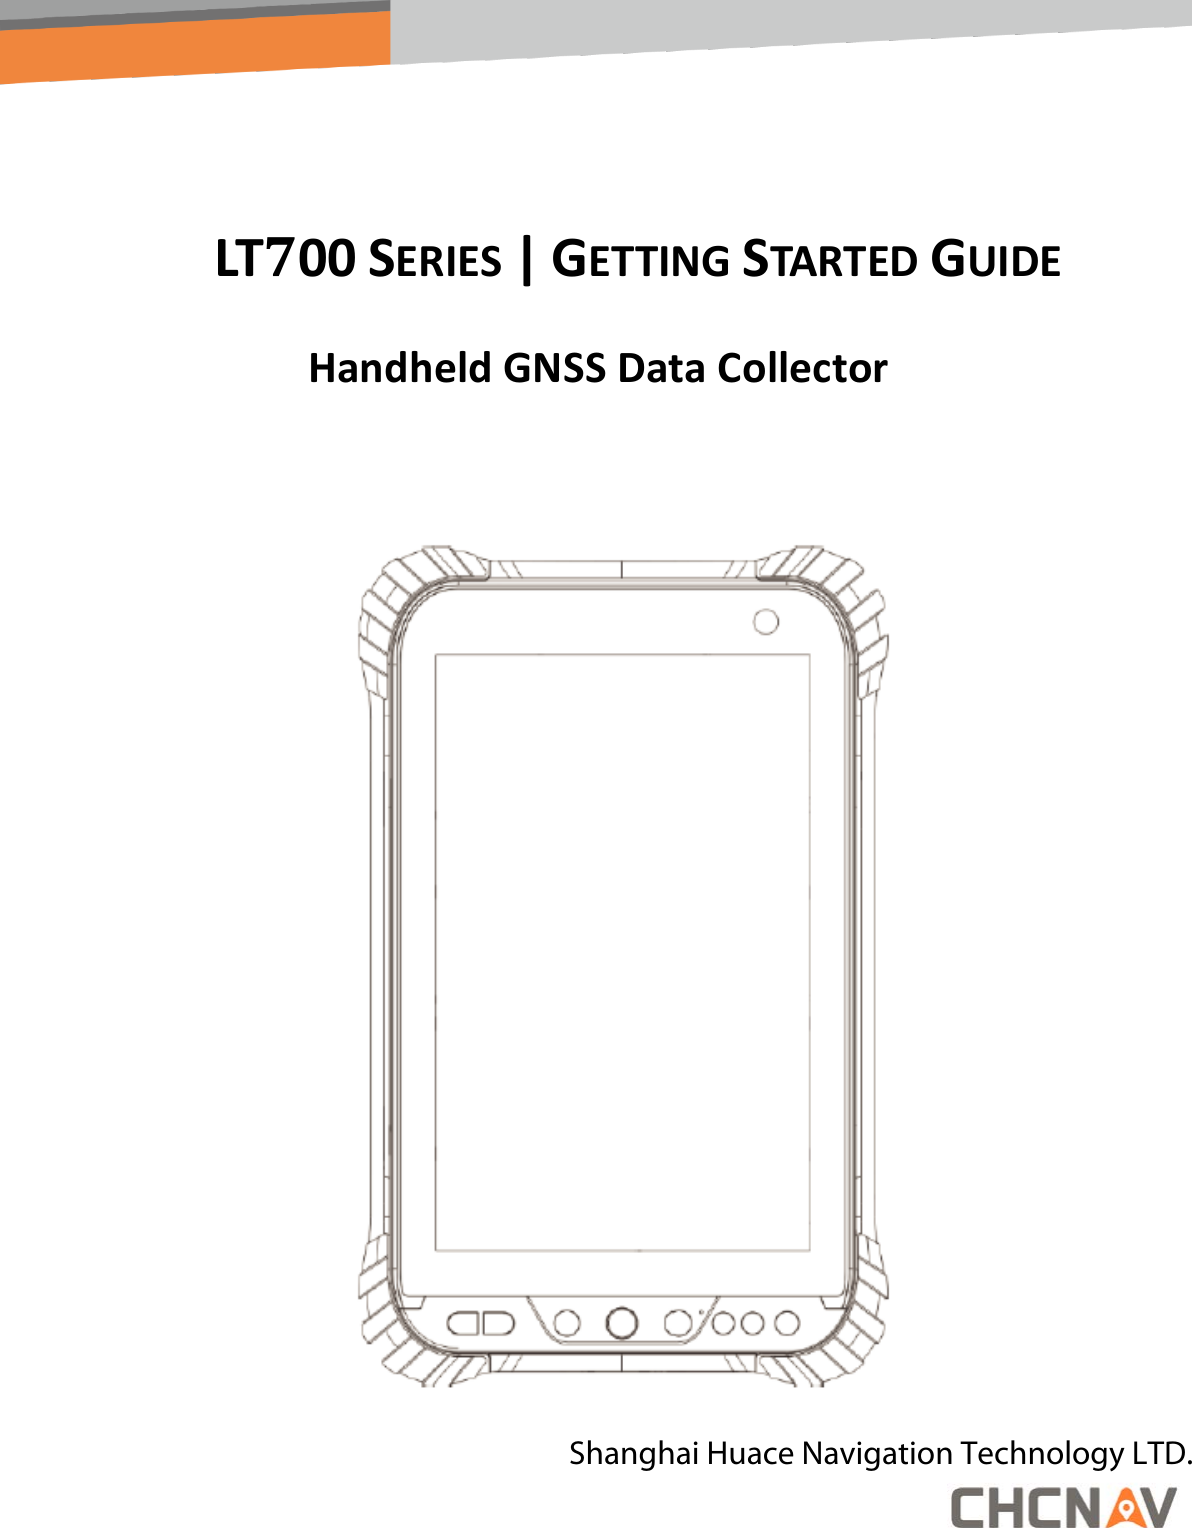   LT700 SERIES | GETTING STARTED GUIDE Handheld GNSS Data Collector   Shanghai Huace Navigation Technology LTD.